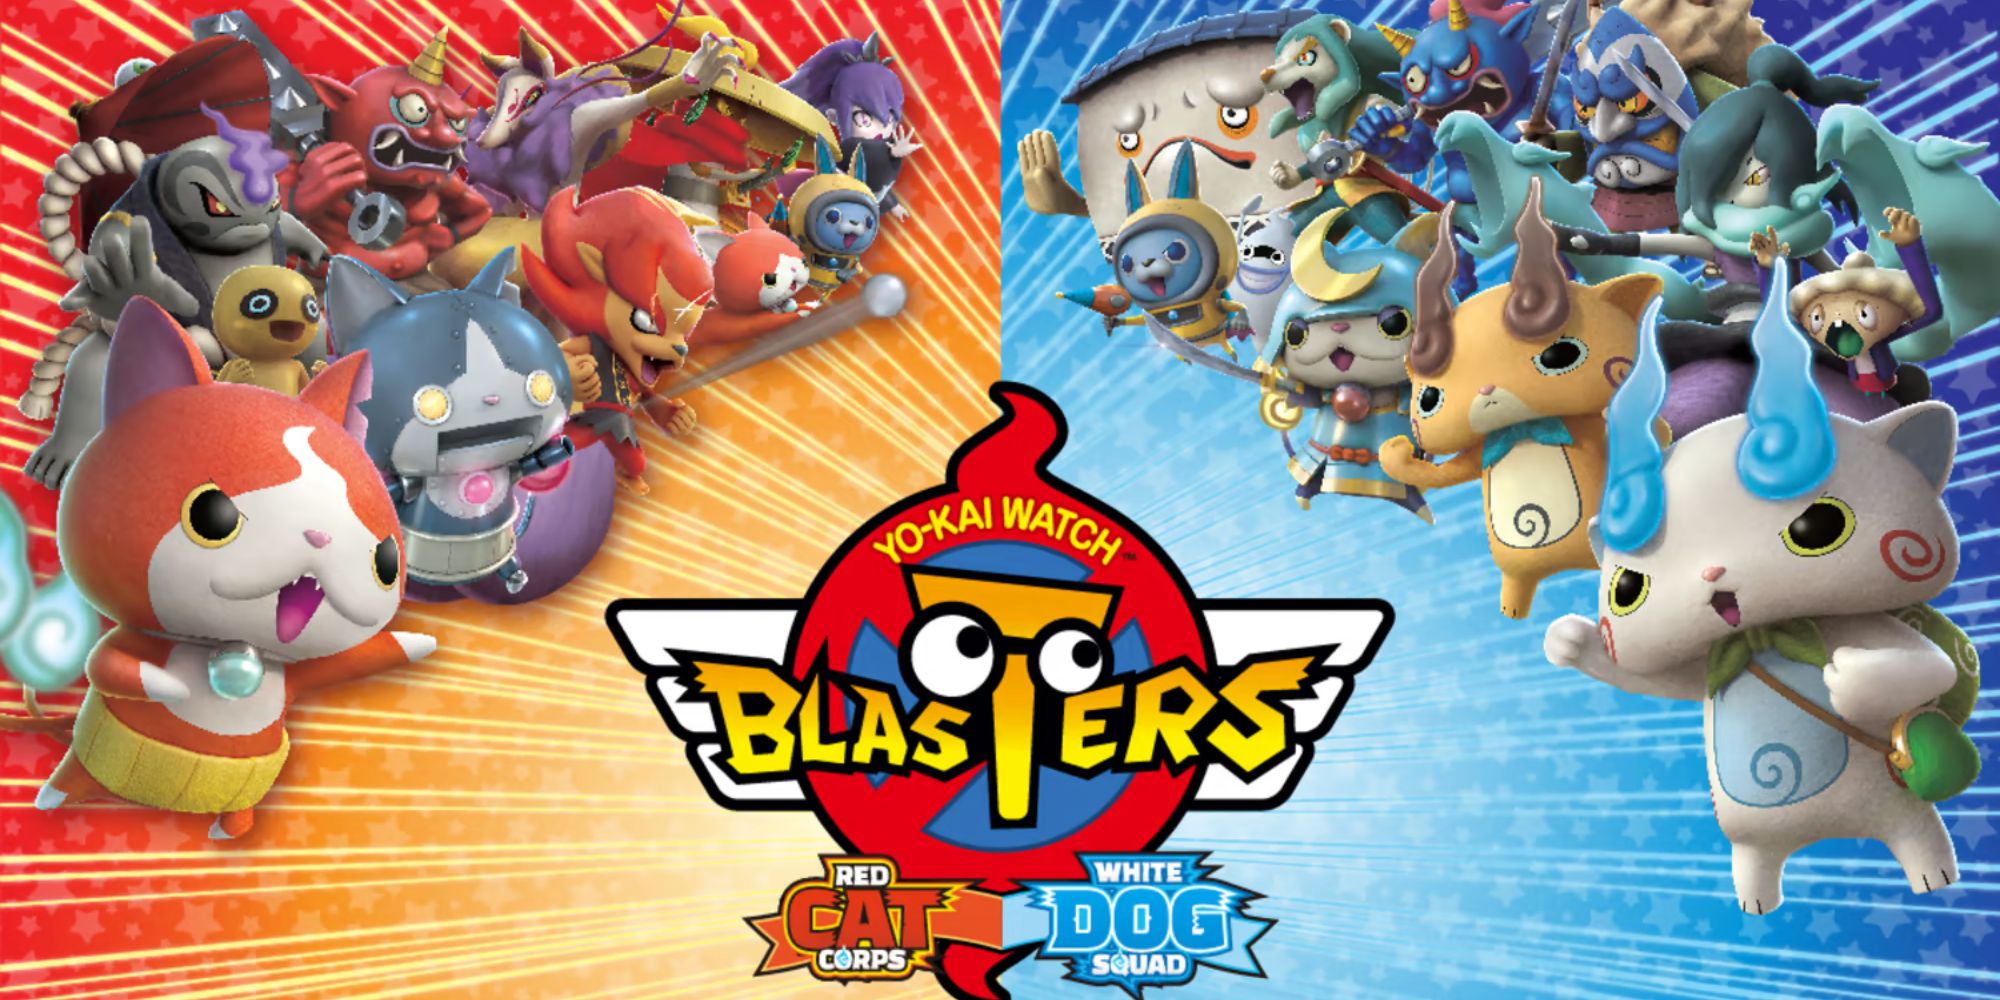 a promotional image for Yo-Kai Watch Blasters featuring the game's logo in the middle with a split image on either side featuring various yokai from either version of the game